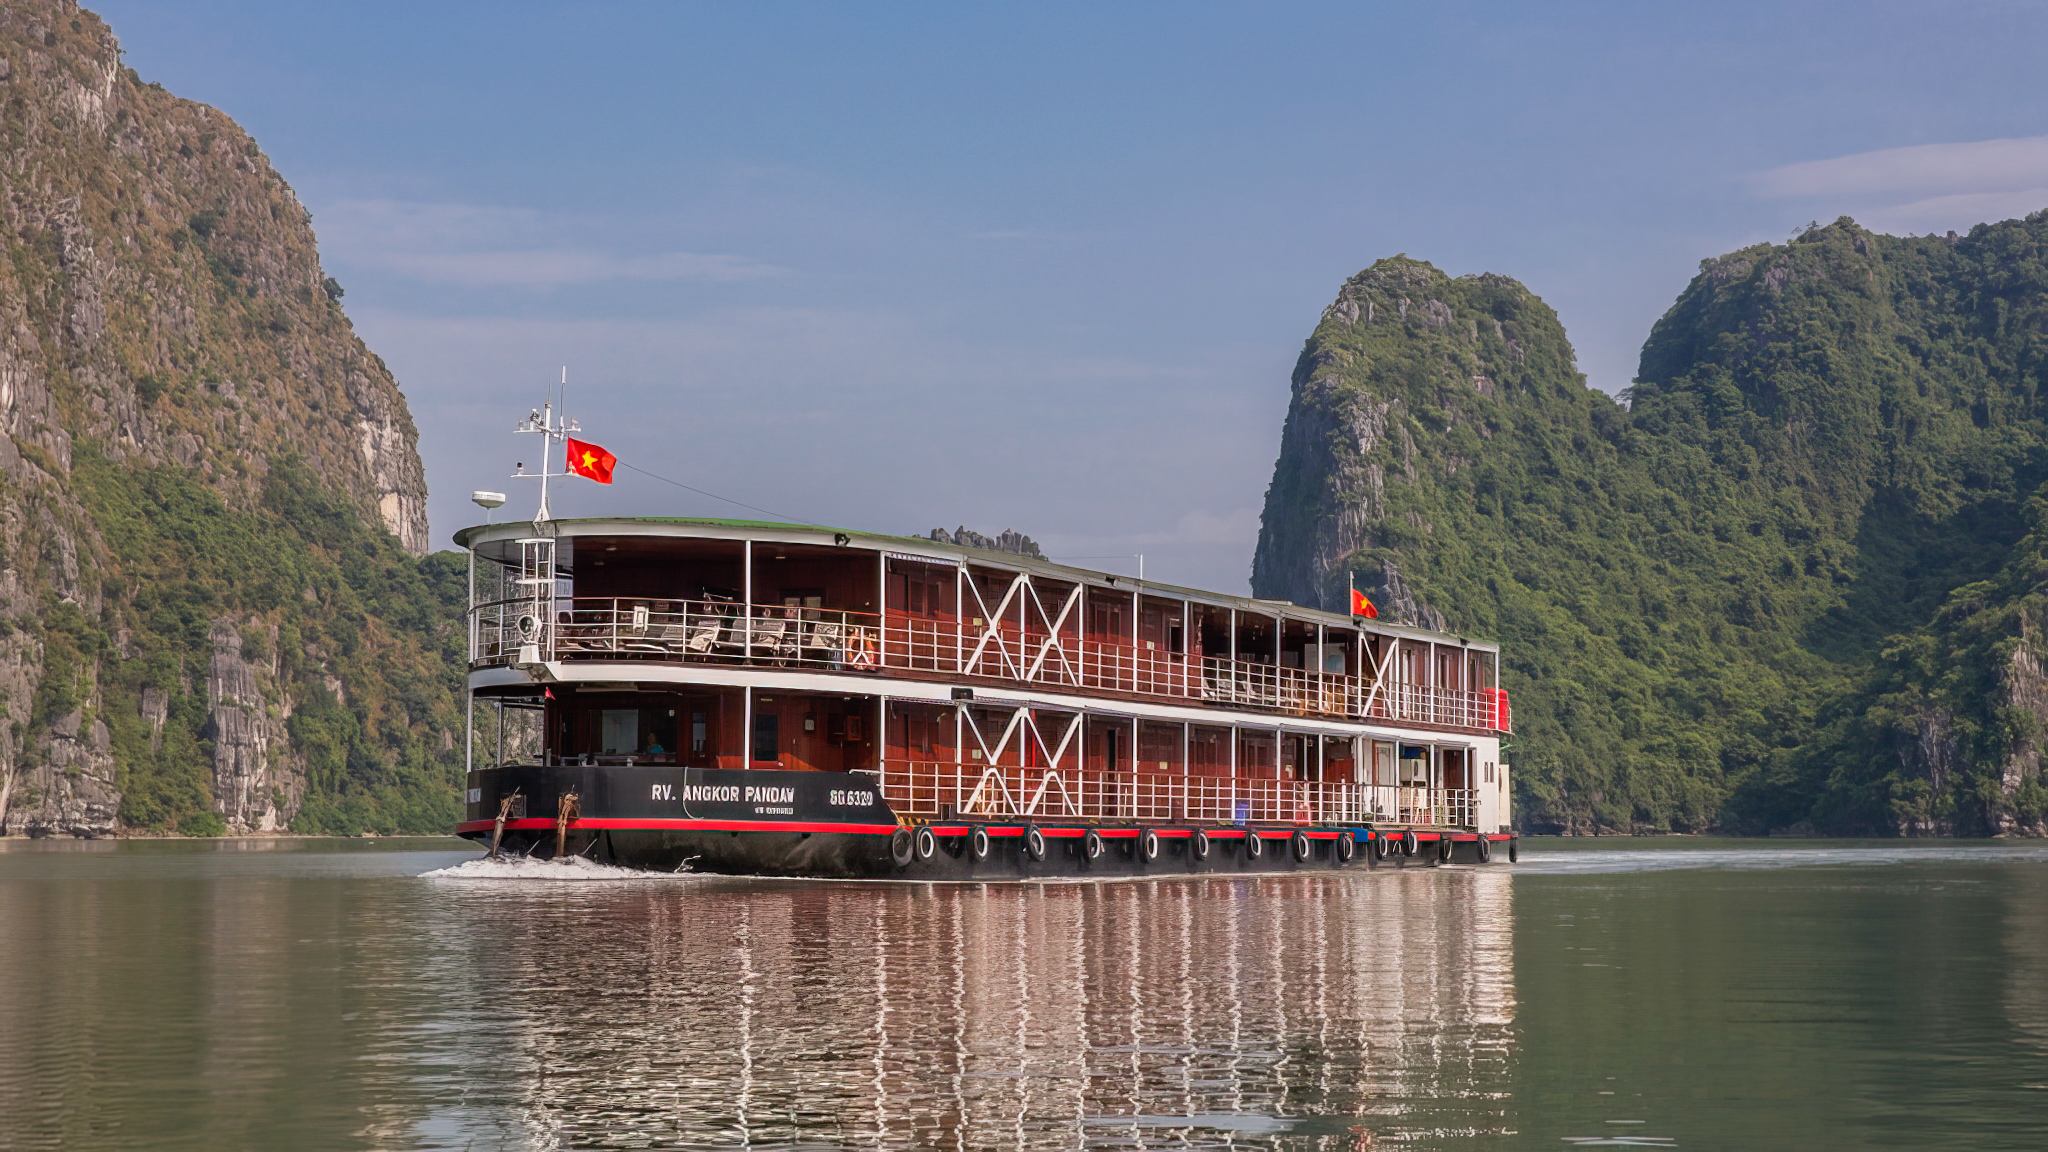 pandaw cruise lines